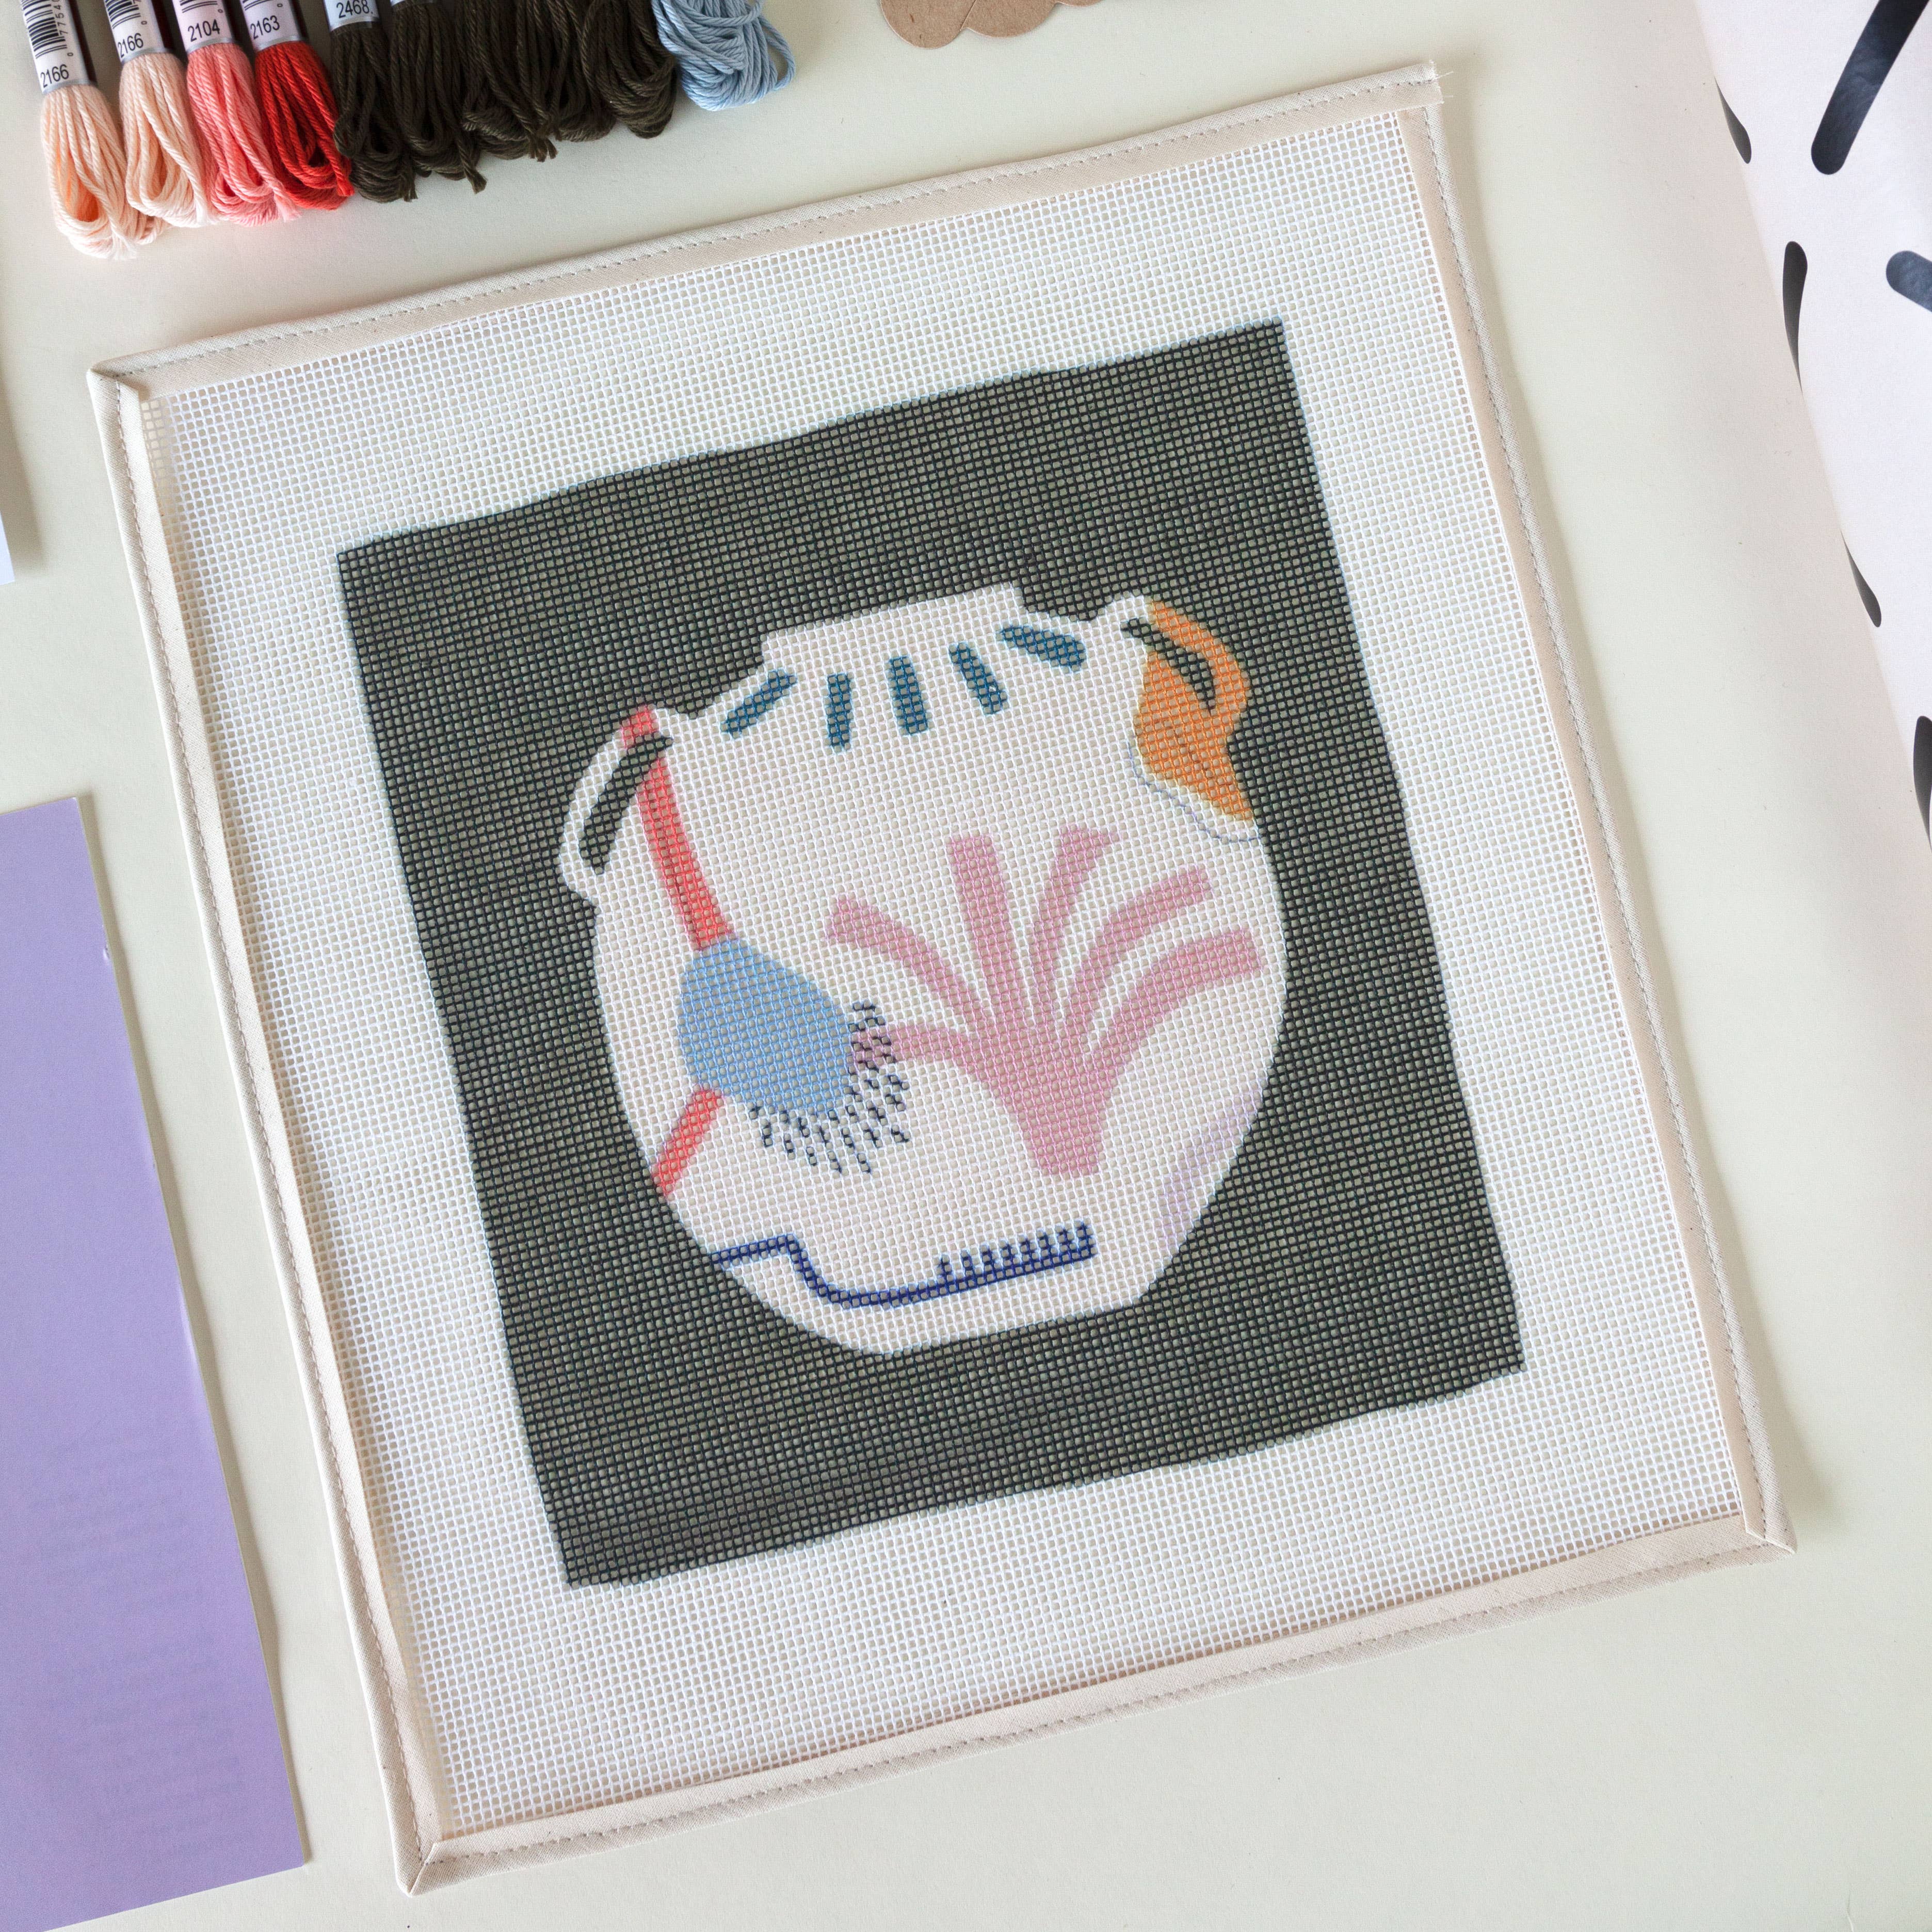 Clay Belly Needlepoint Kit | DIY Embroidery